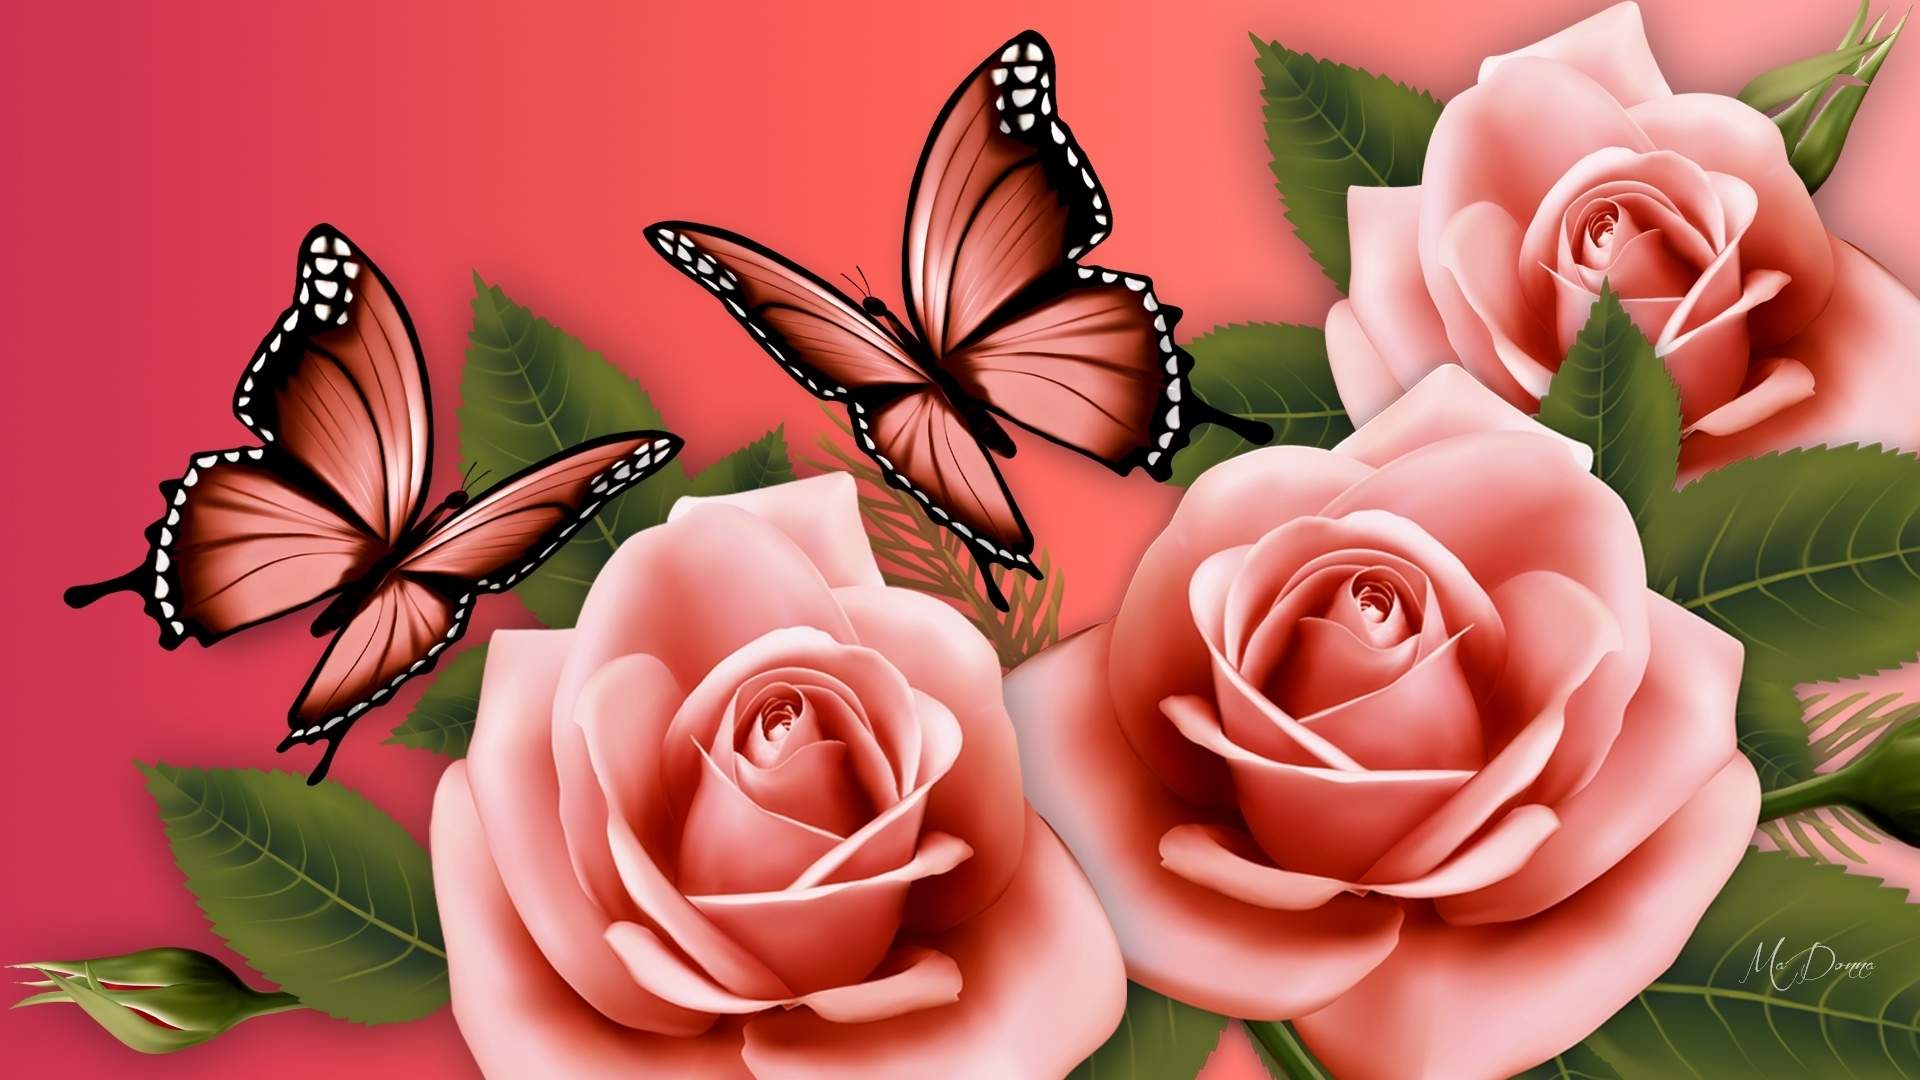 Flowers With Butterfly Wallpaper HD